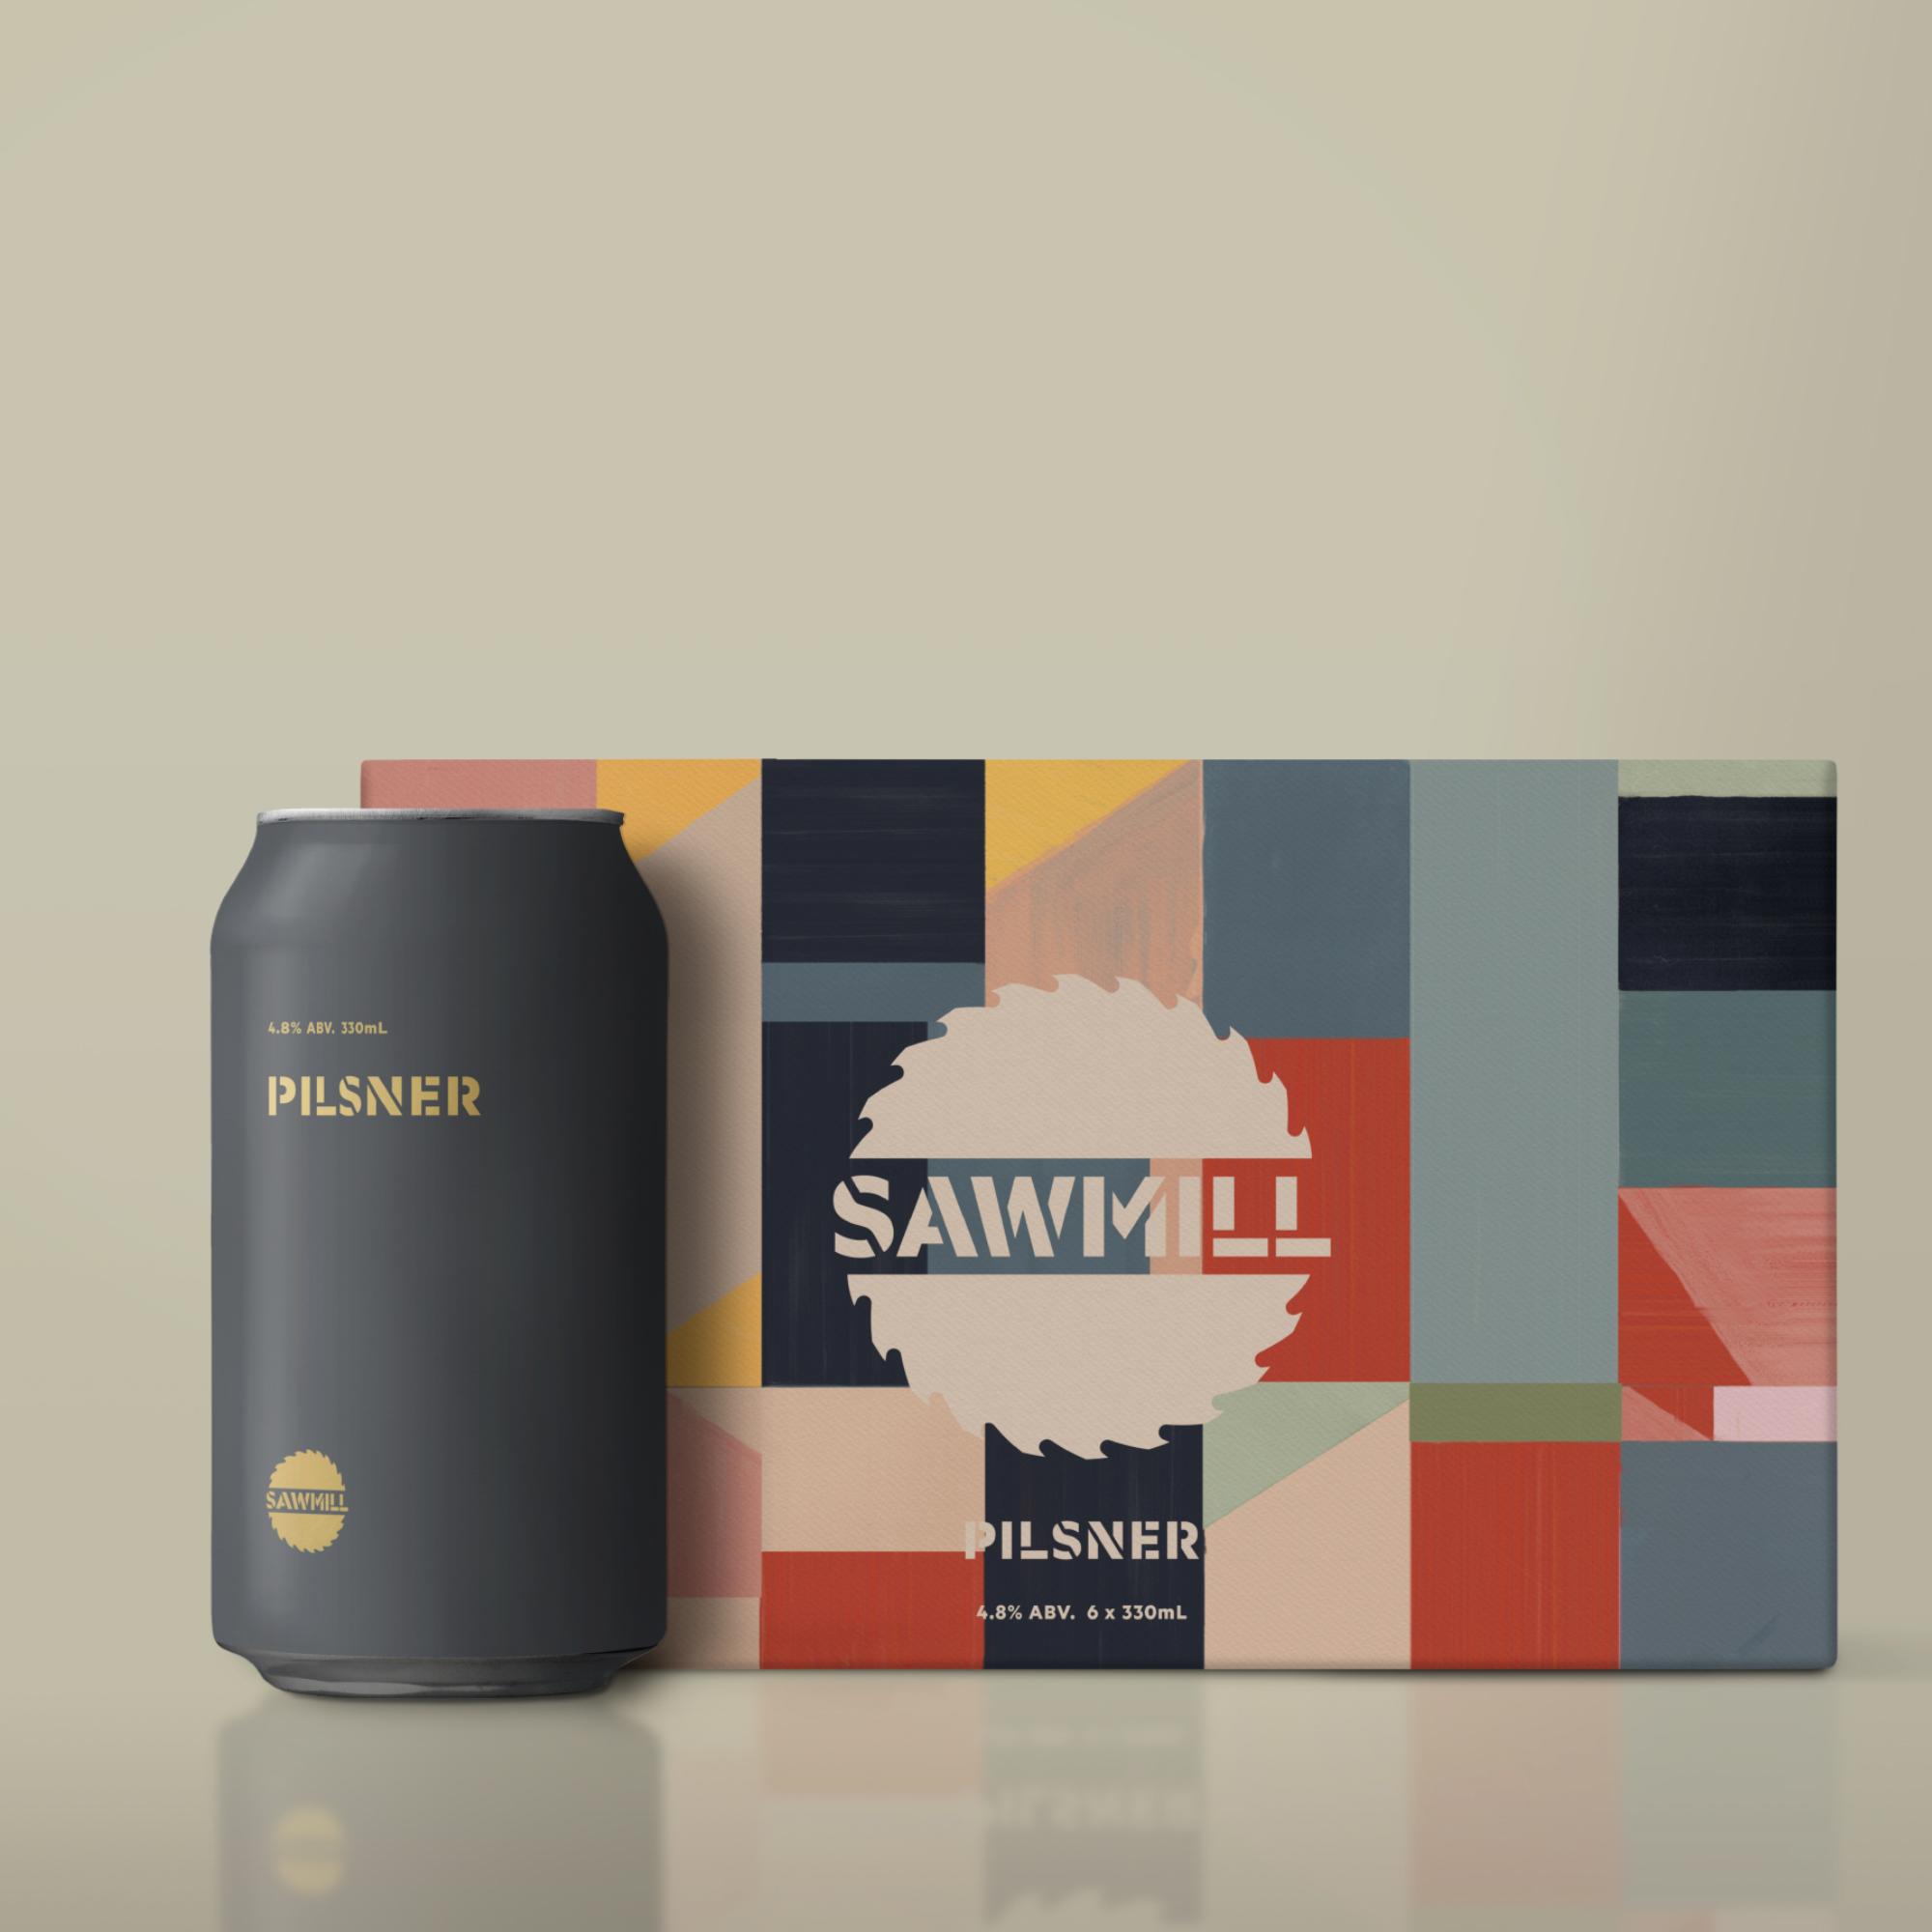 product image for Sawmill Pilsner - 24 x 330ml cans